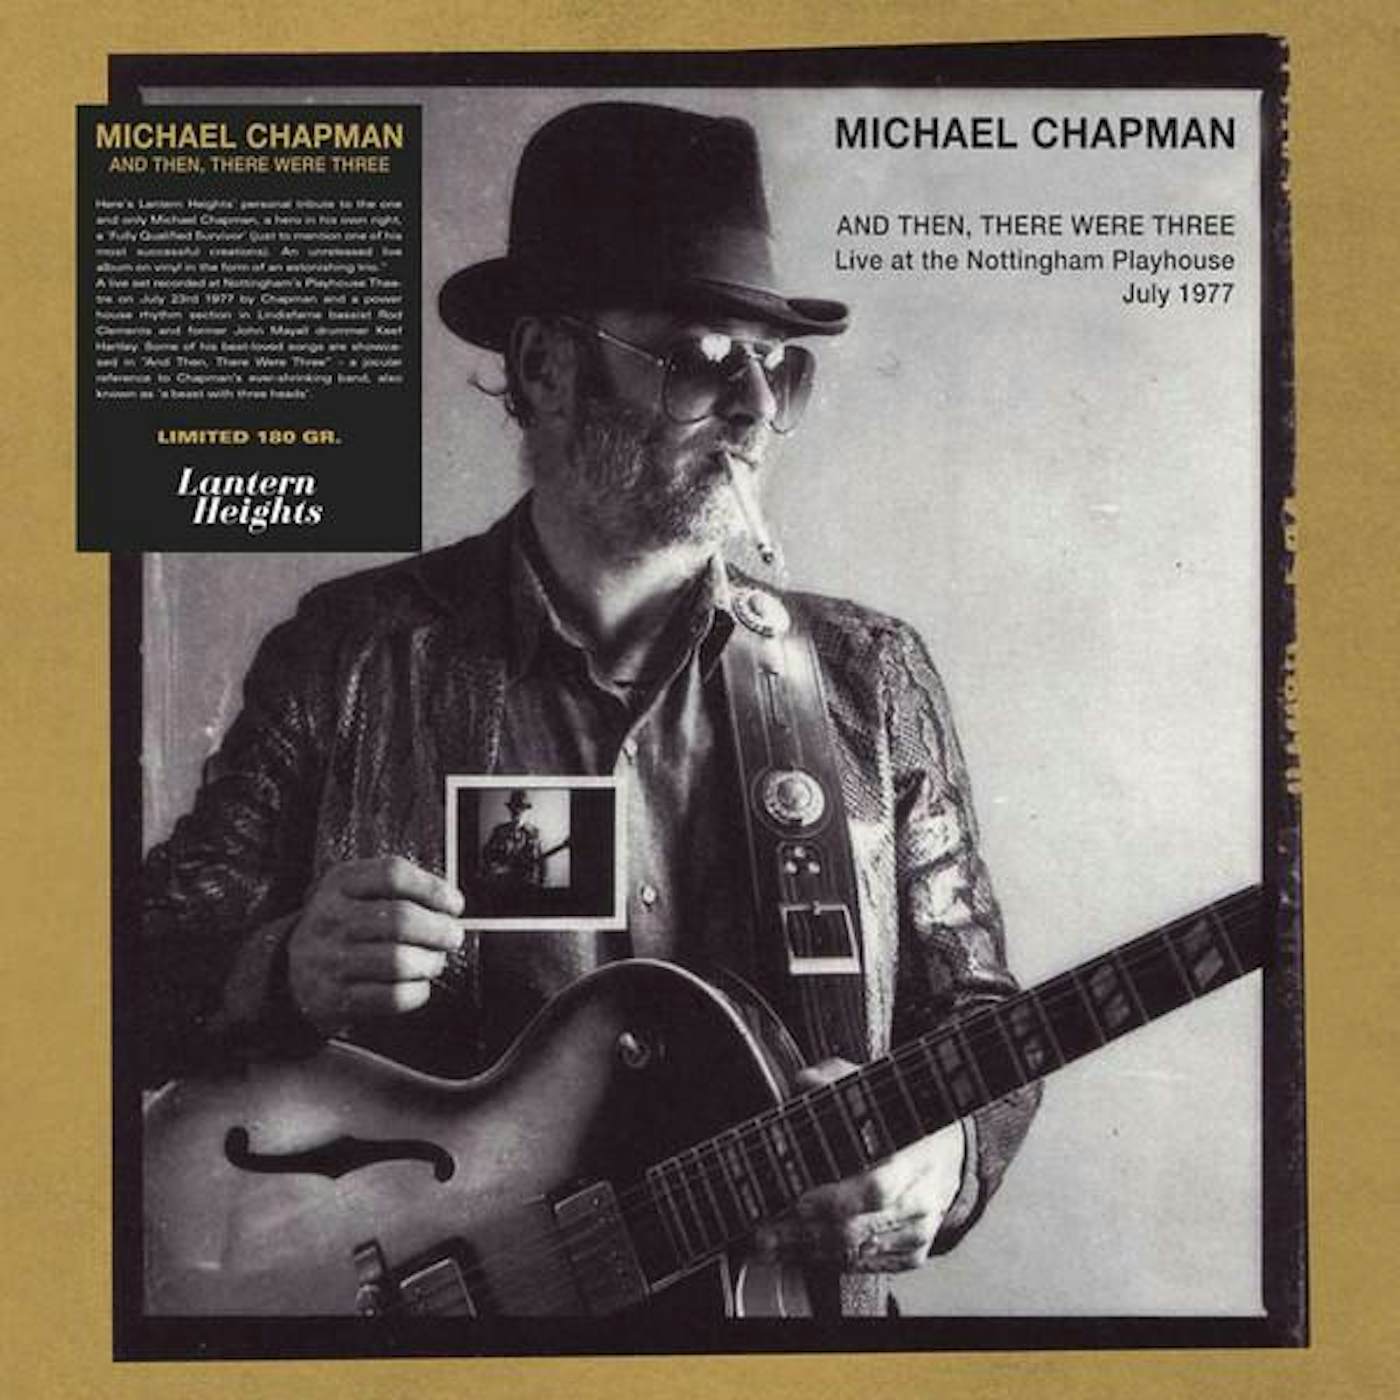 Michael Chapman AND THEN THERE WERE THREE: LIVE AT THE NOTTINGHAM PLAYHOUSE, JULY 1977 (2LP) Vinyl Record